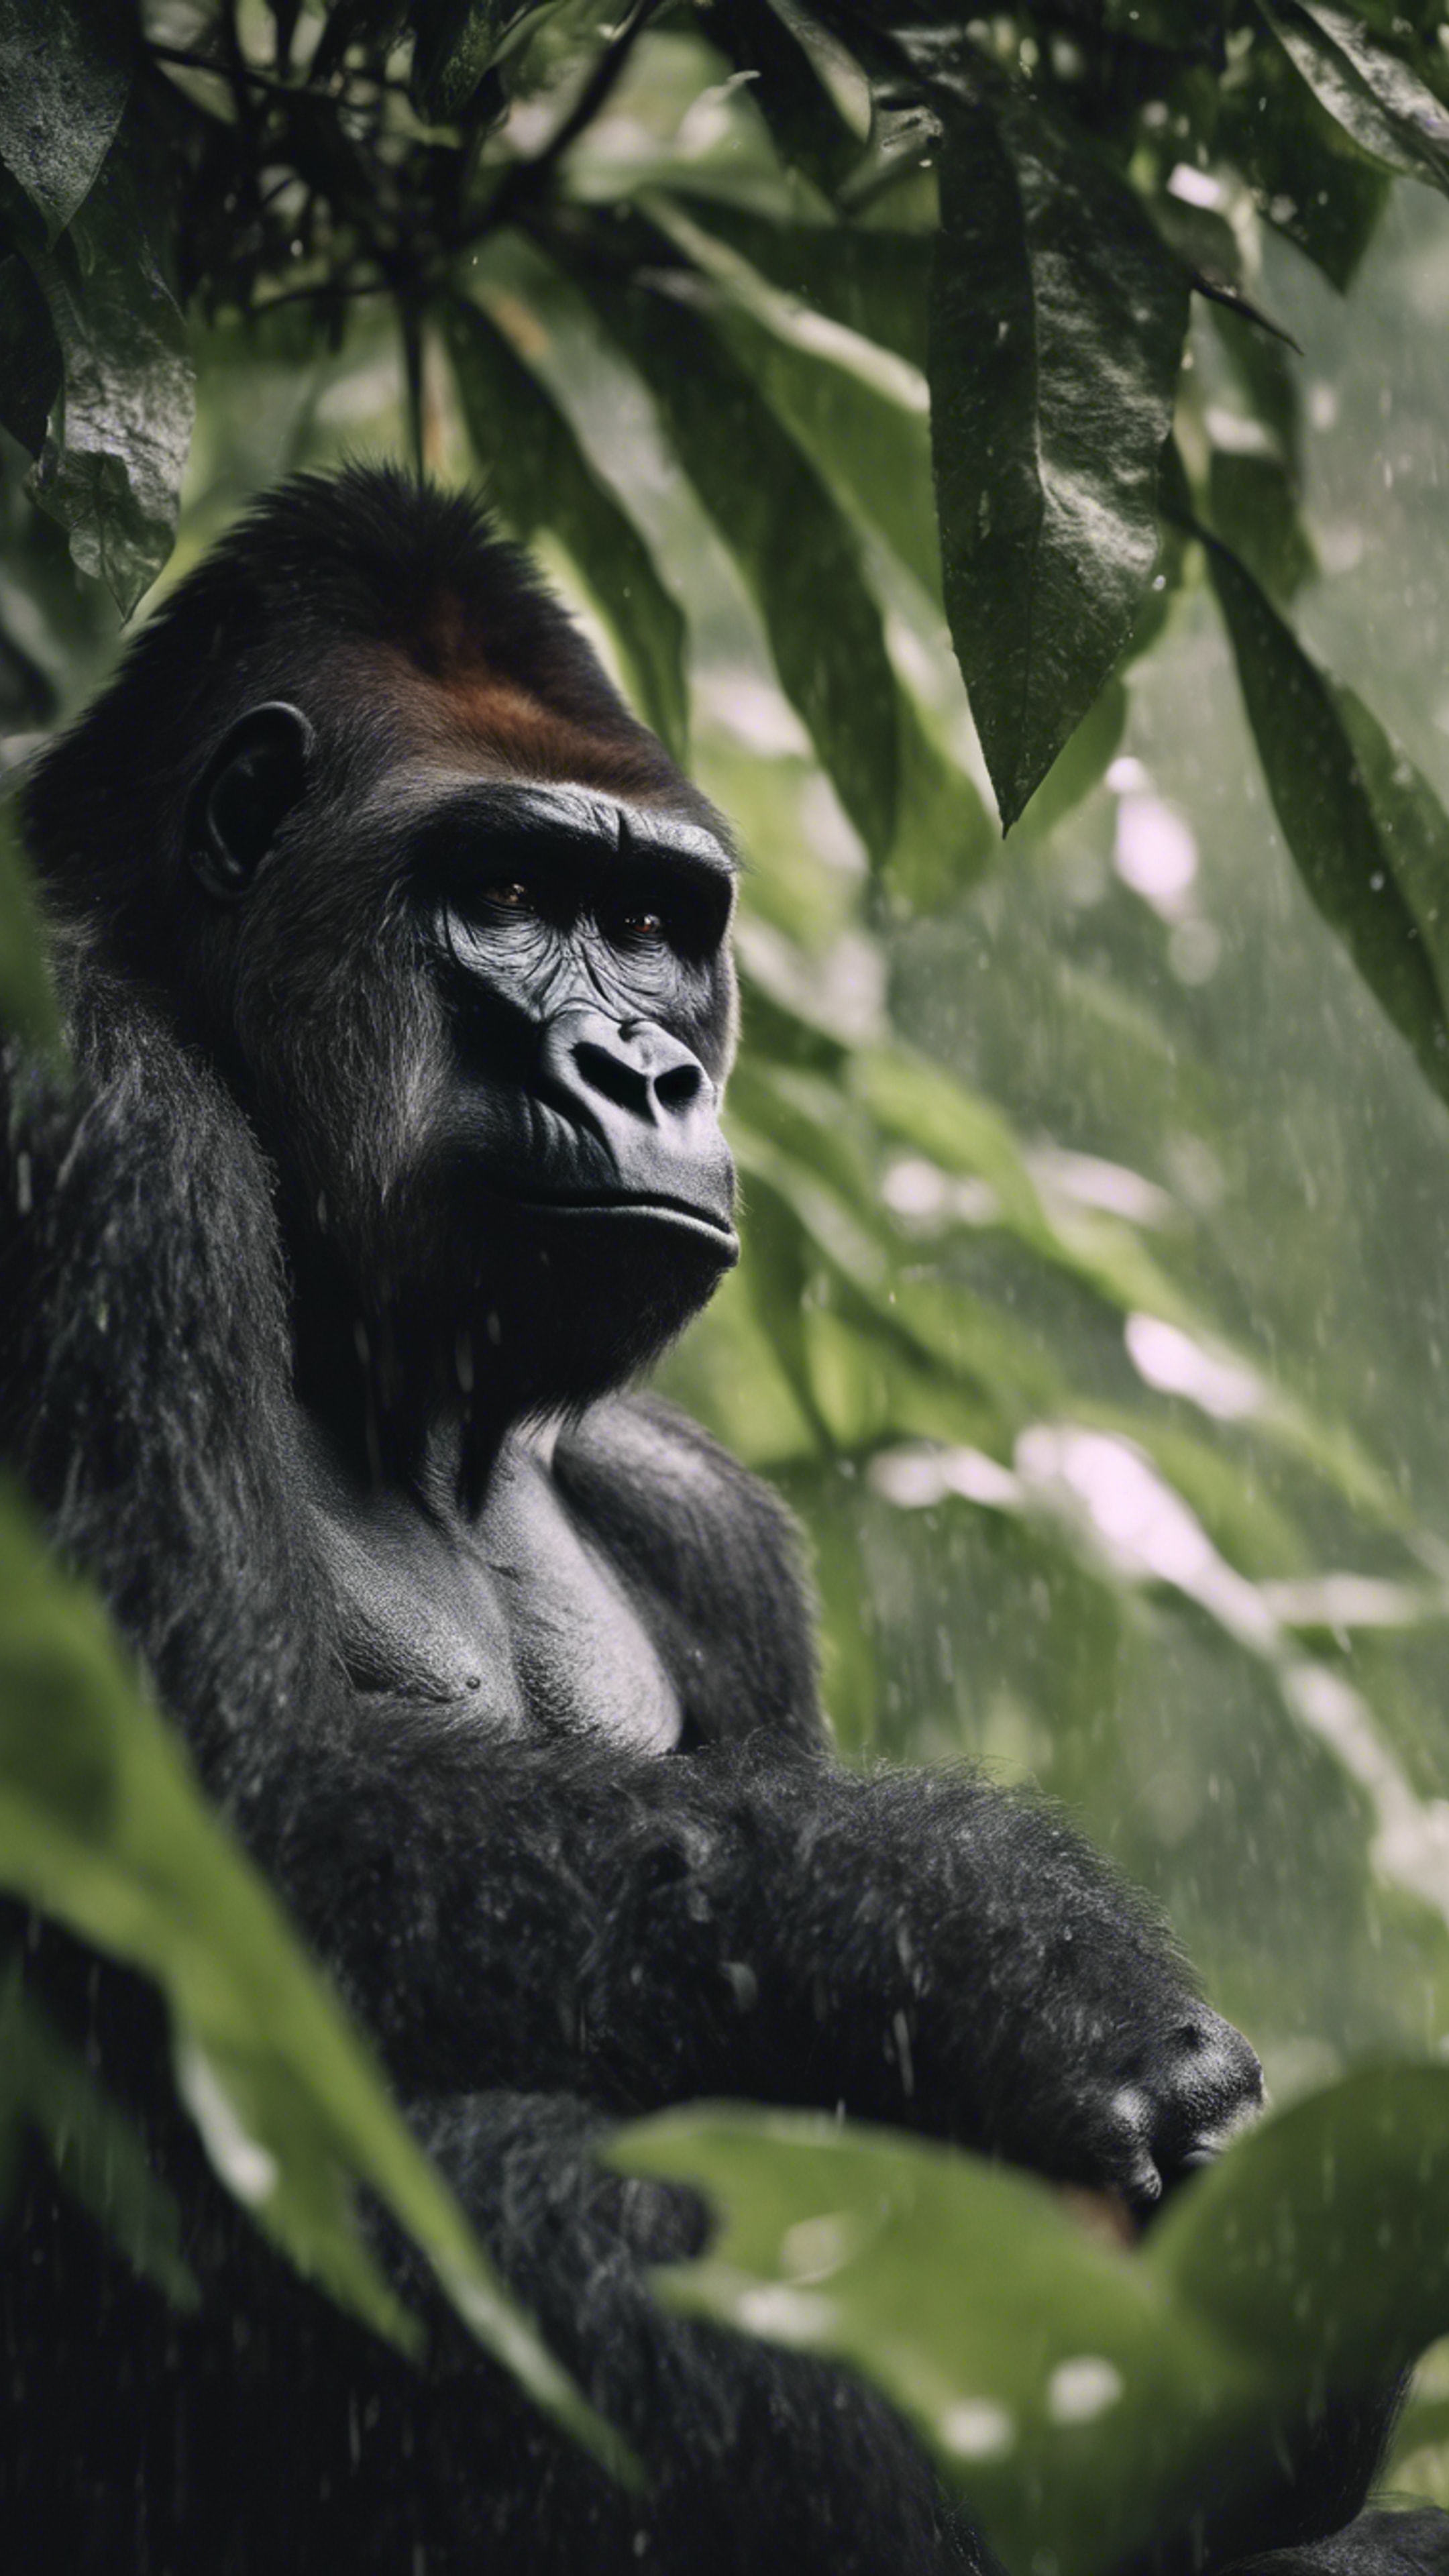 A sad gorilla on a rainy day, gazing out from under the shelter of giant leaves. Шпалери[ce7c66a51f504b8e8f6d]